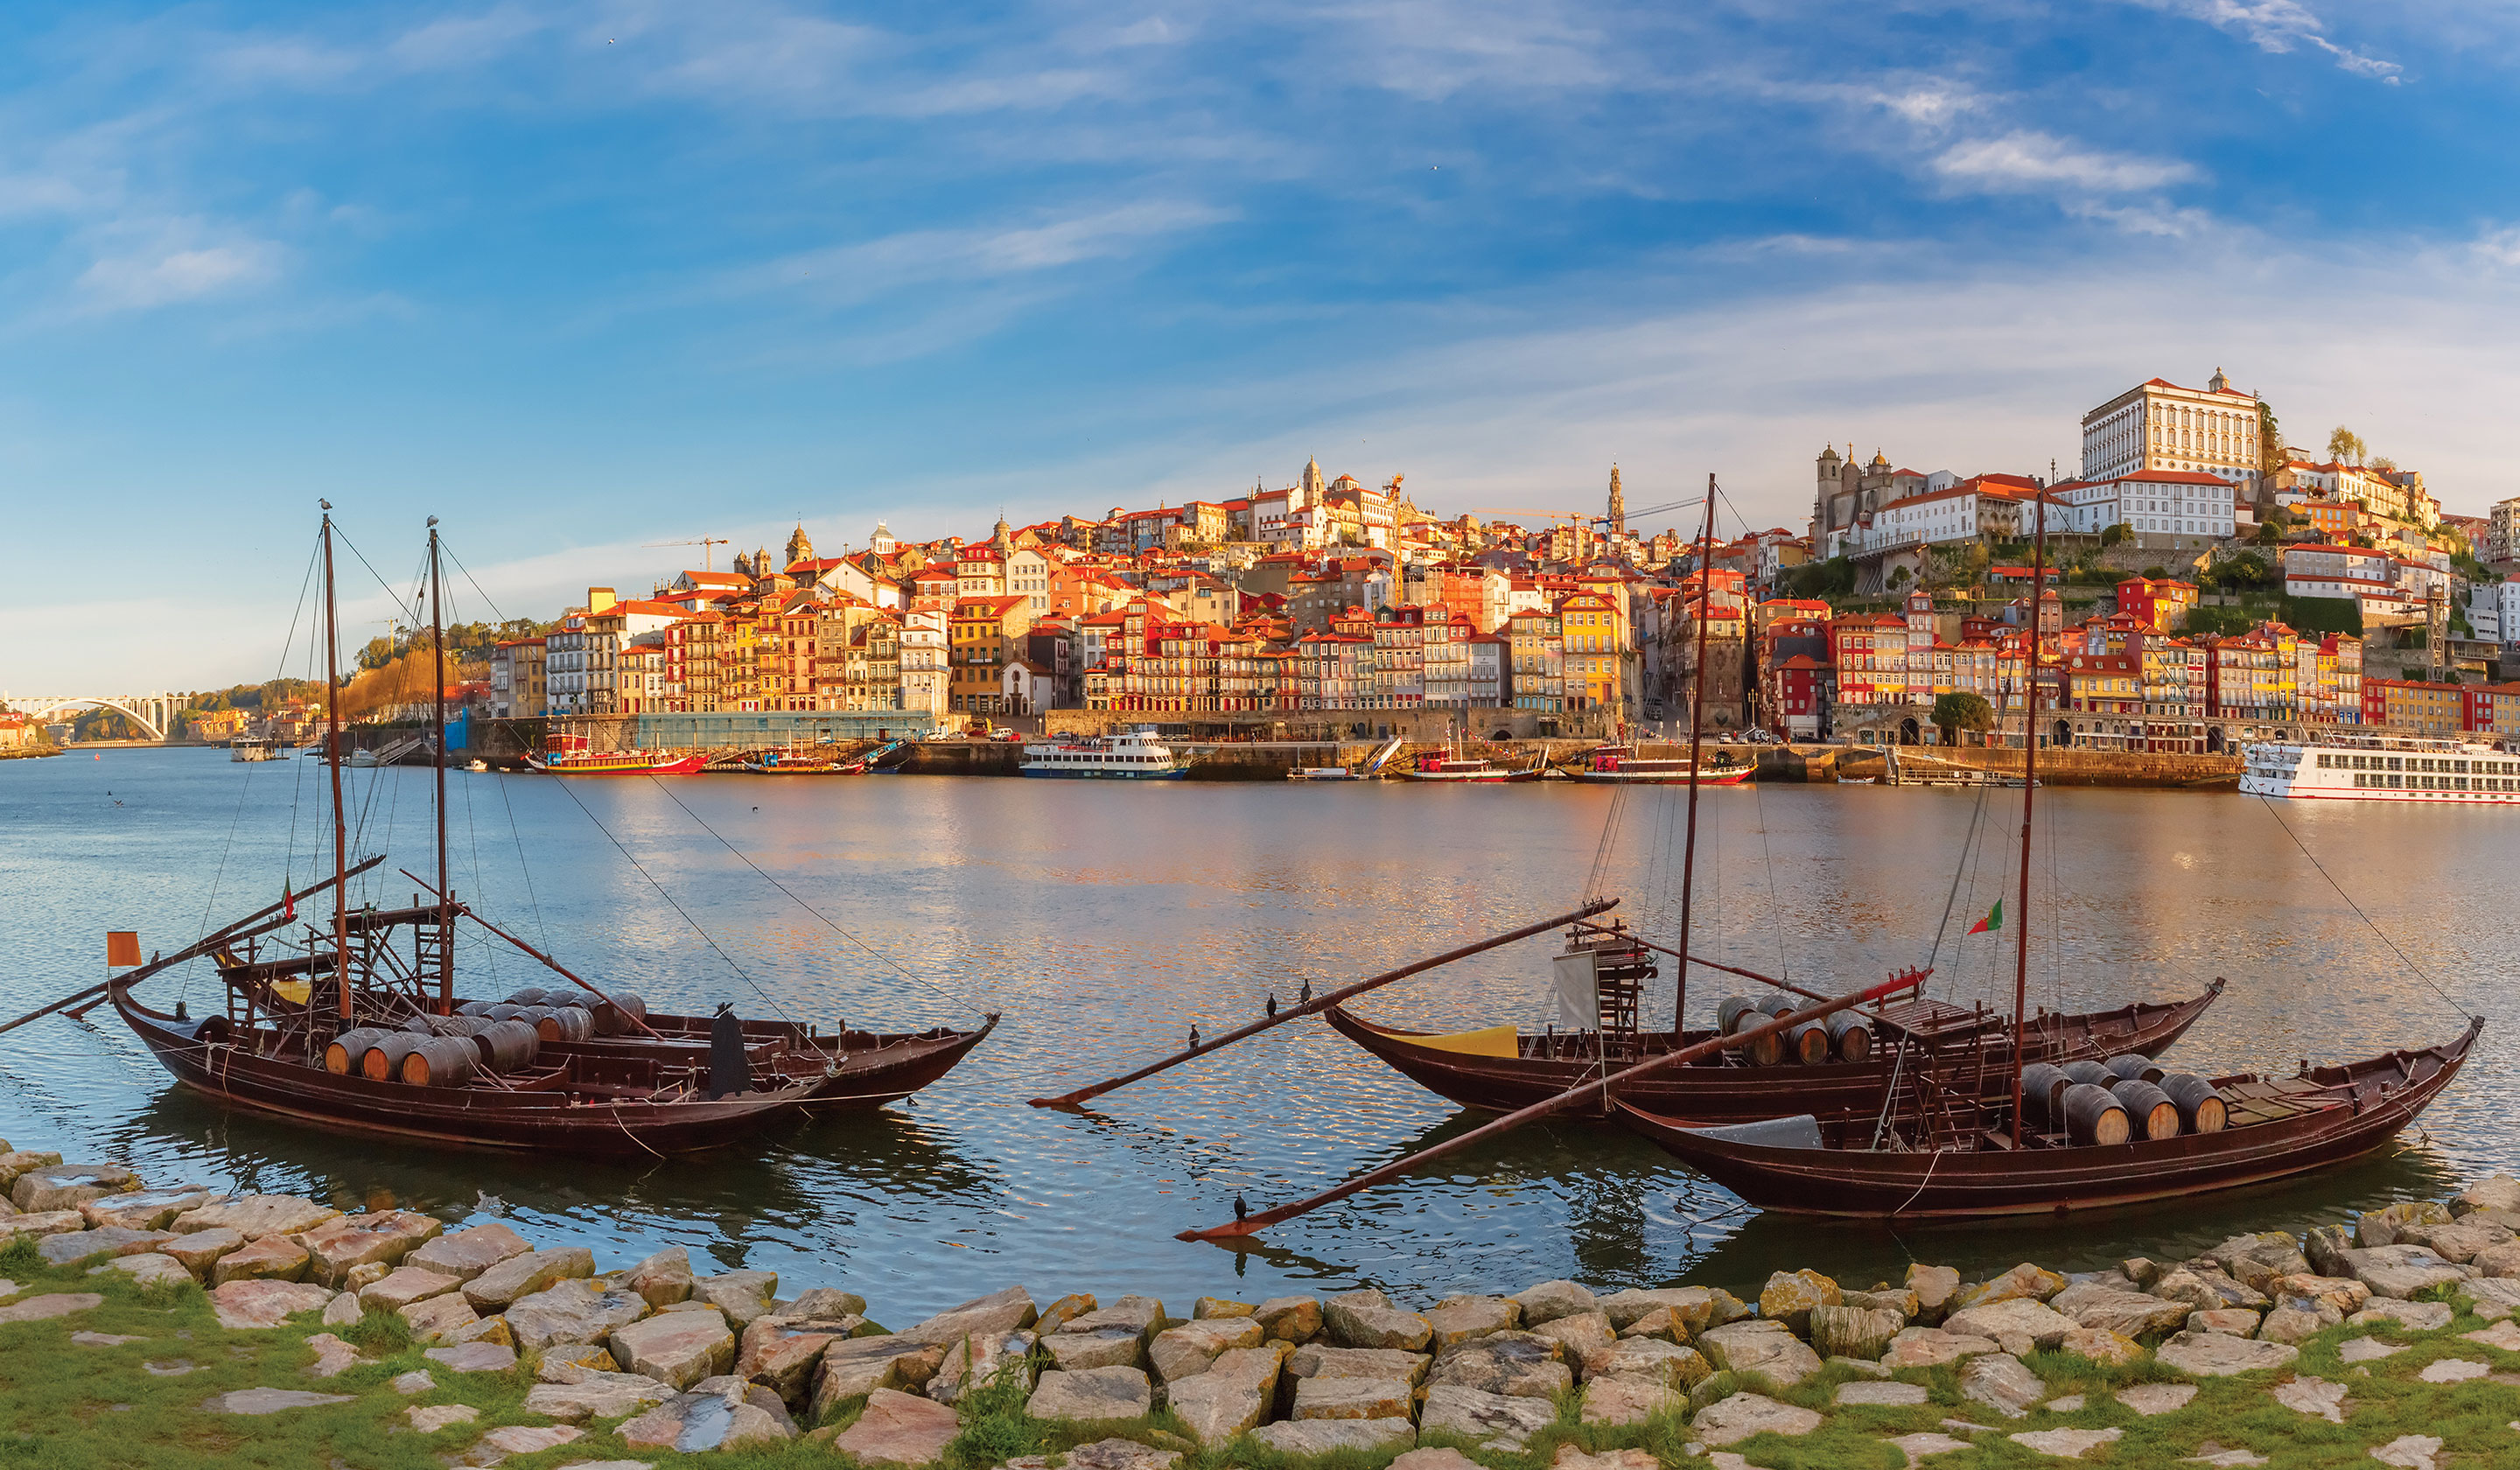 Villages and Vintages: Cruising the Douro River Valley